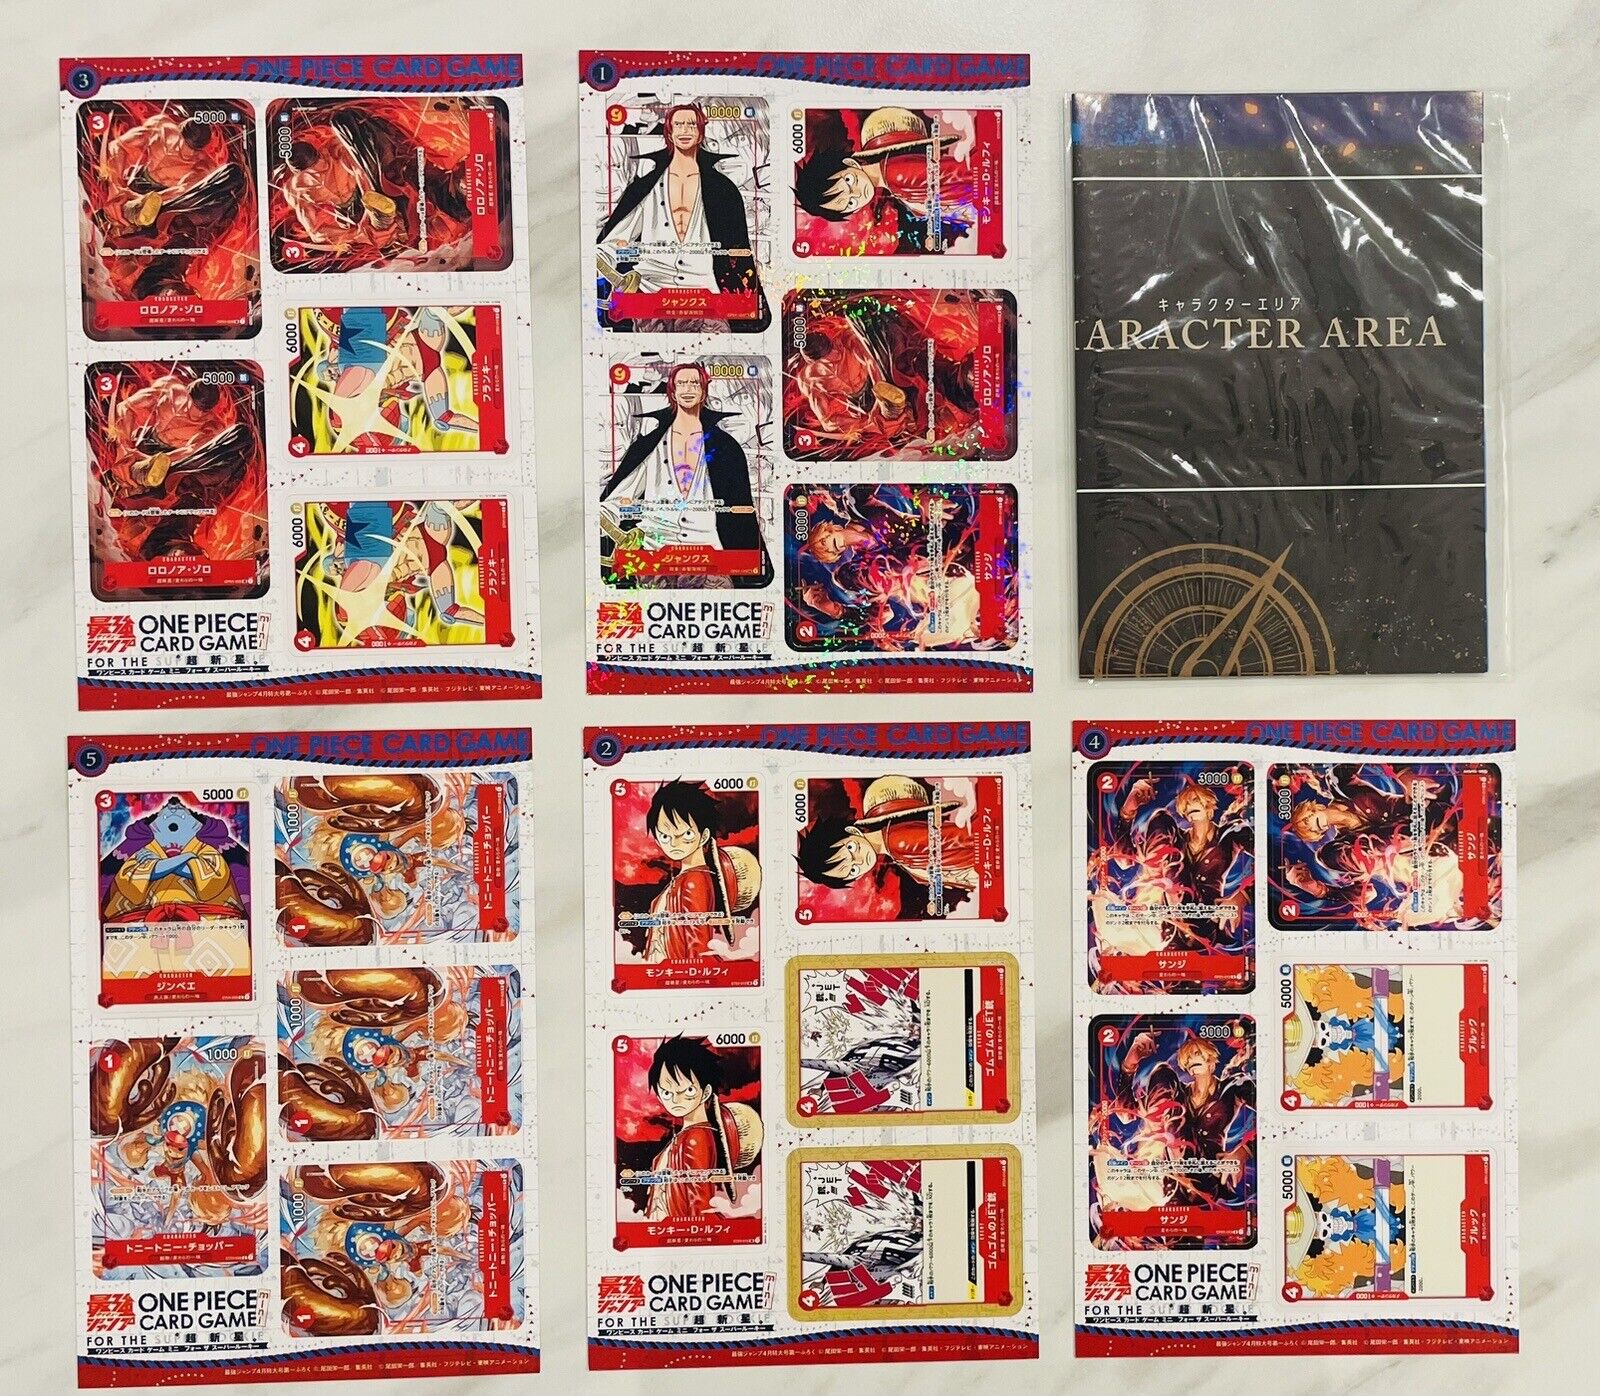 ONE PIECE Mini Card Deck 25 Cards and a Poster by Saikyo jump